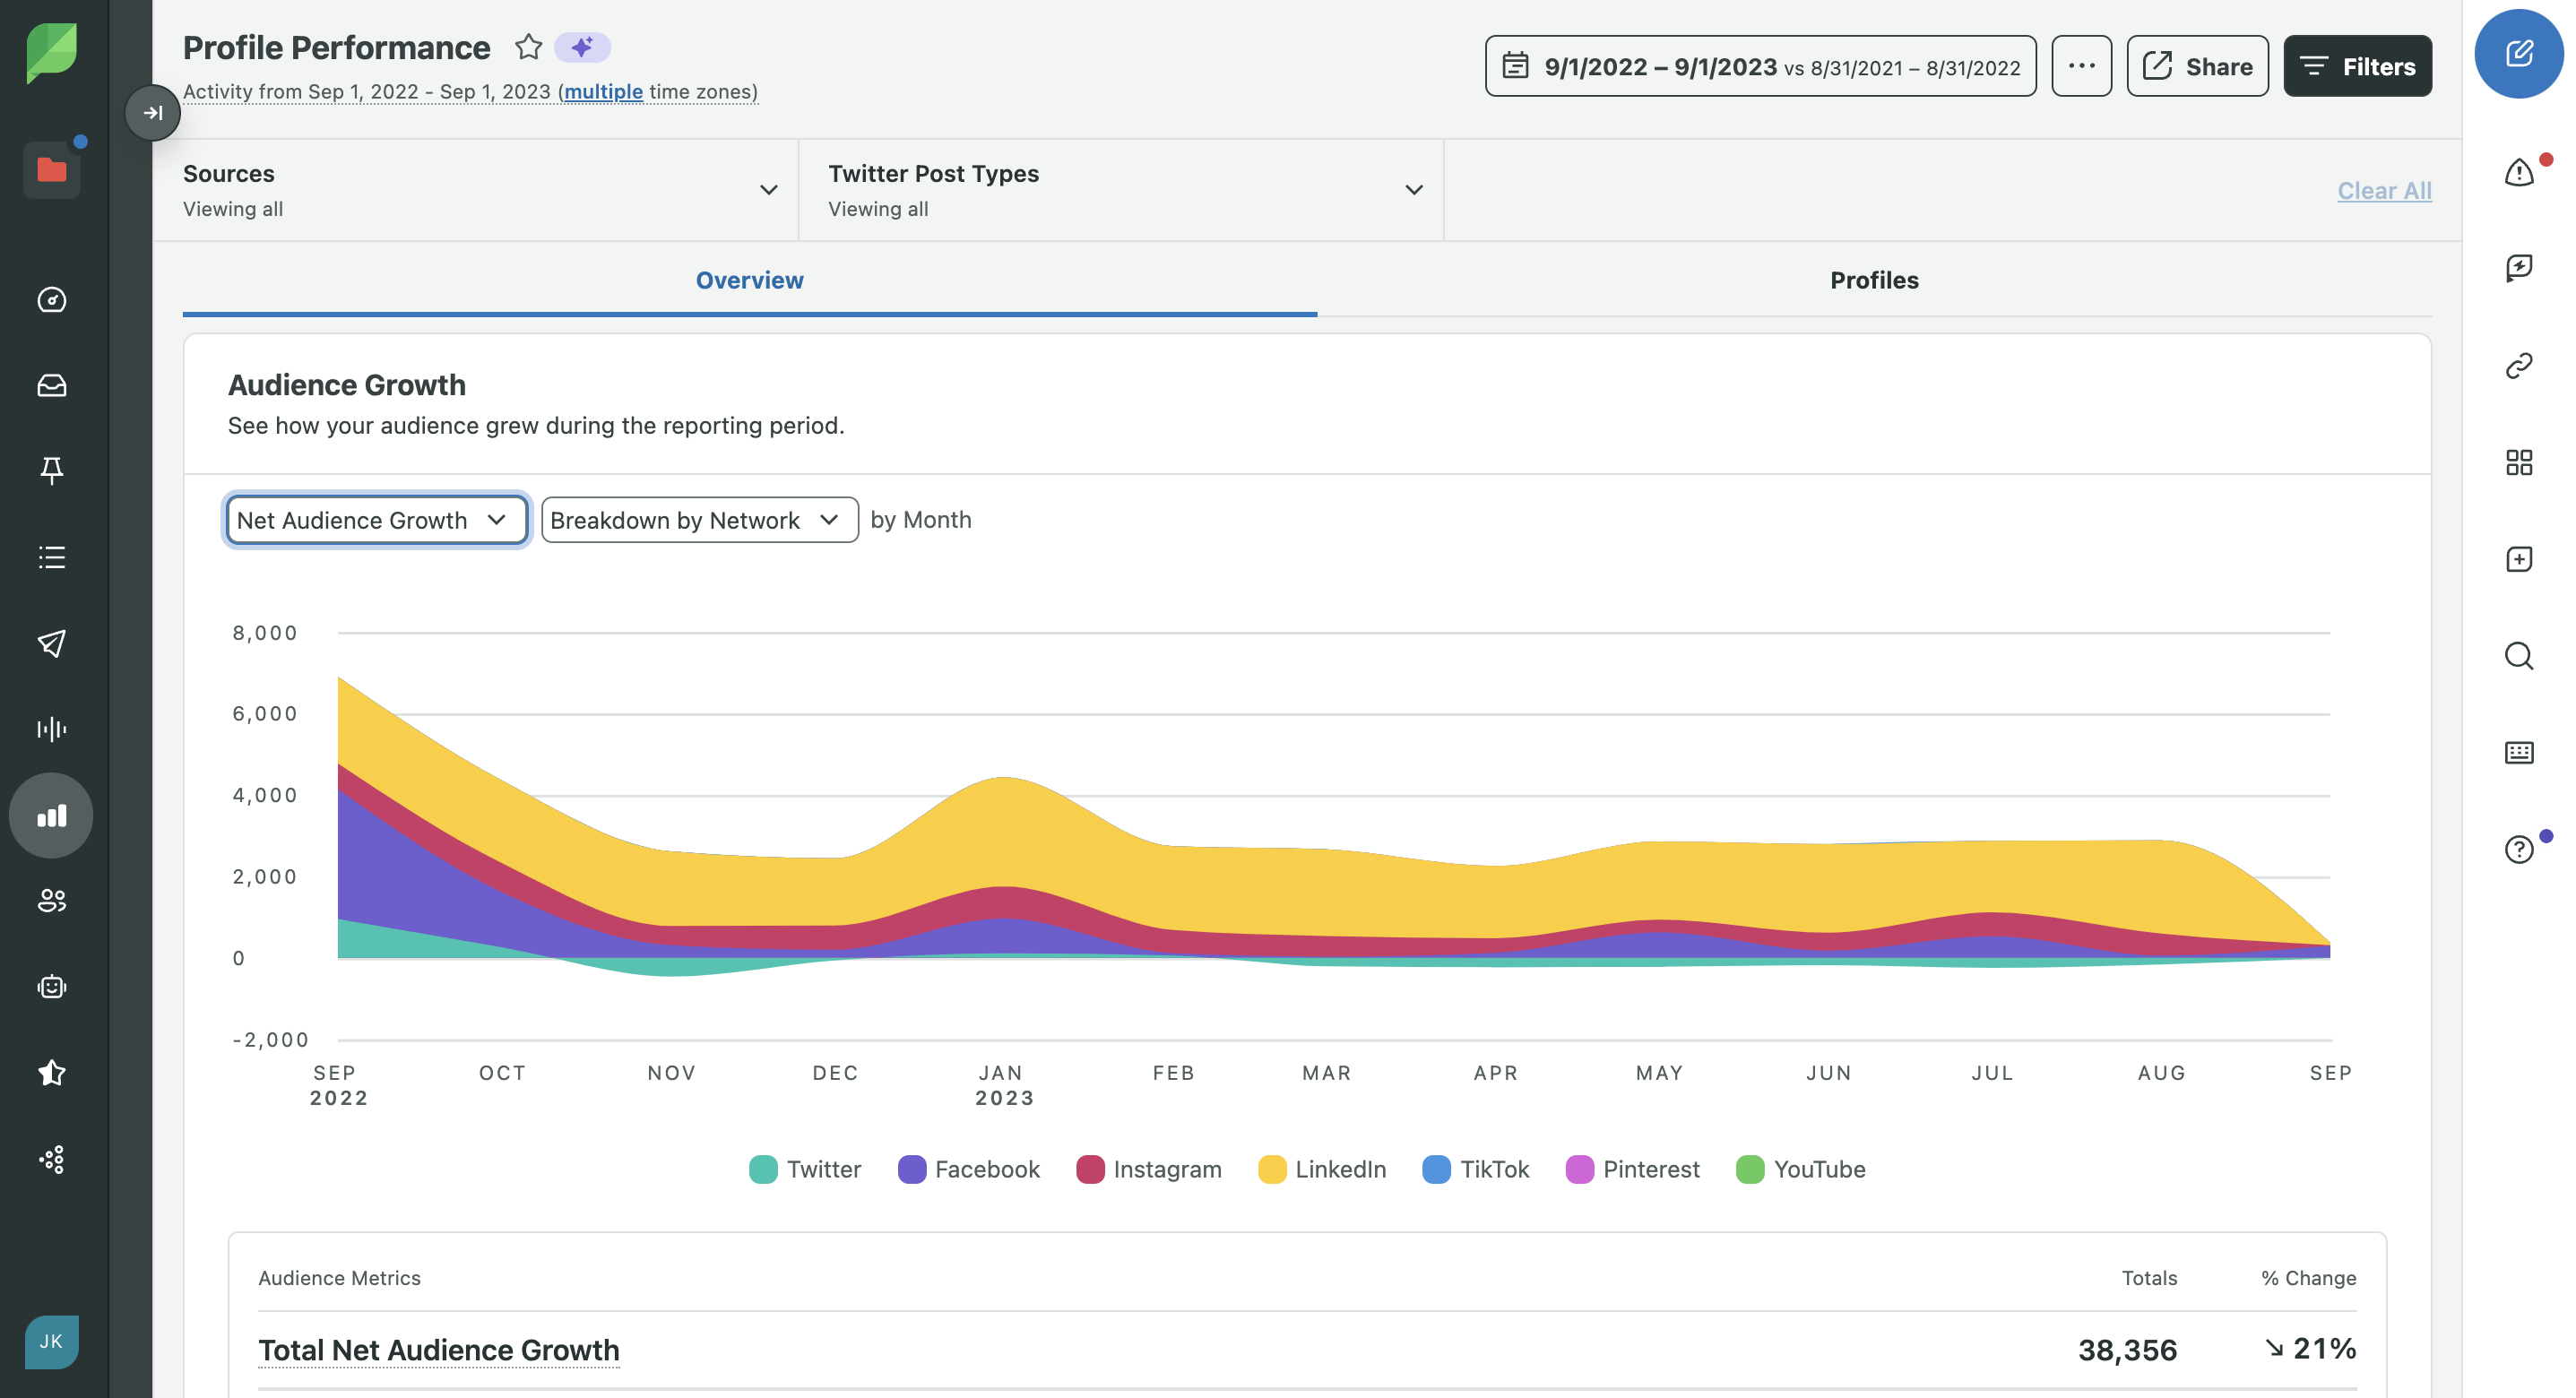 Sprout Social's Profile Perfromance dashboard featuring audience growth across several social media platforms.